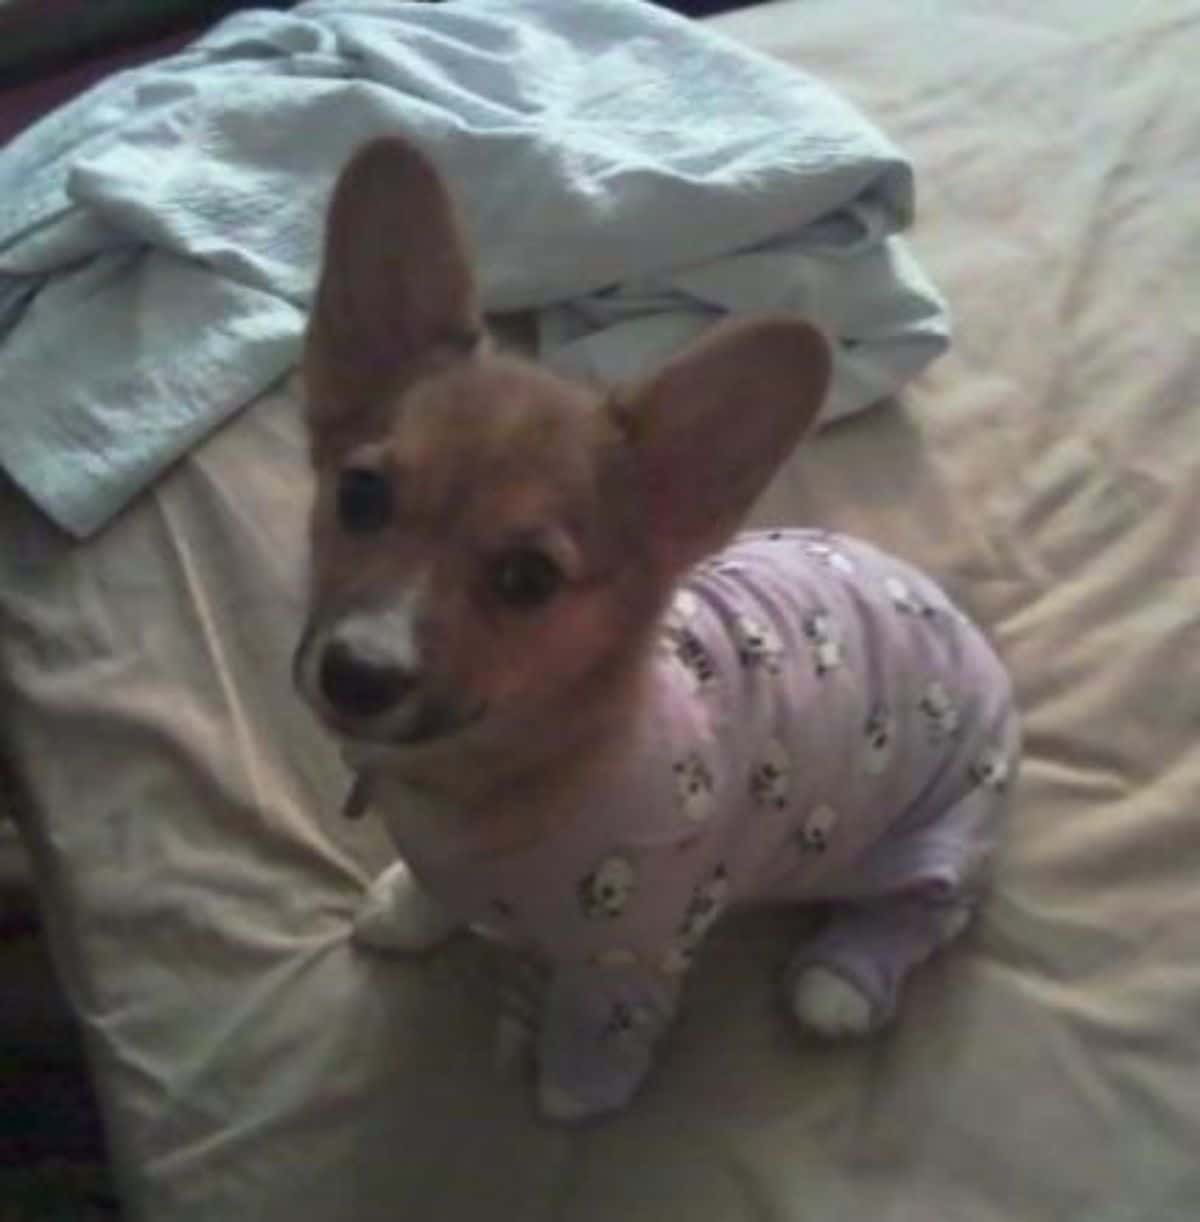 brown and white corgi puppy wearing a pink black and white onesie